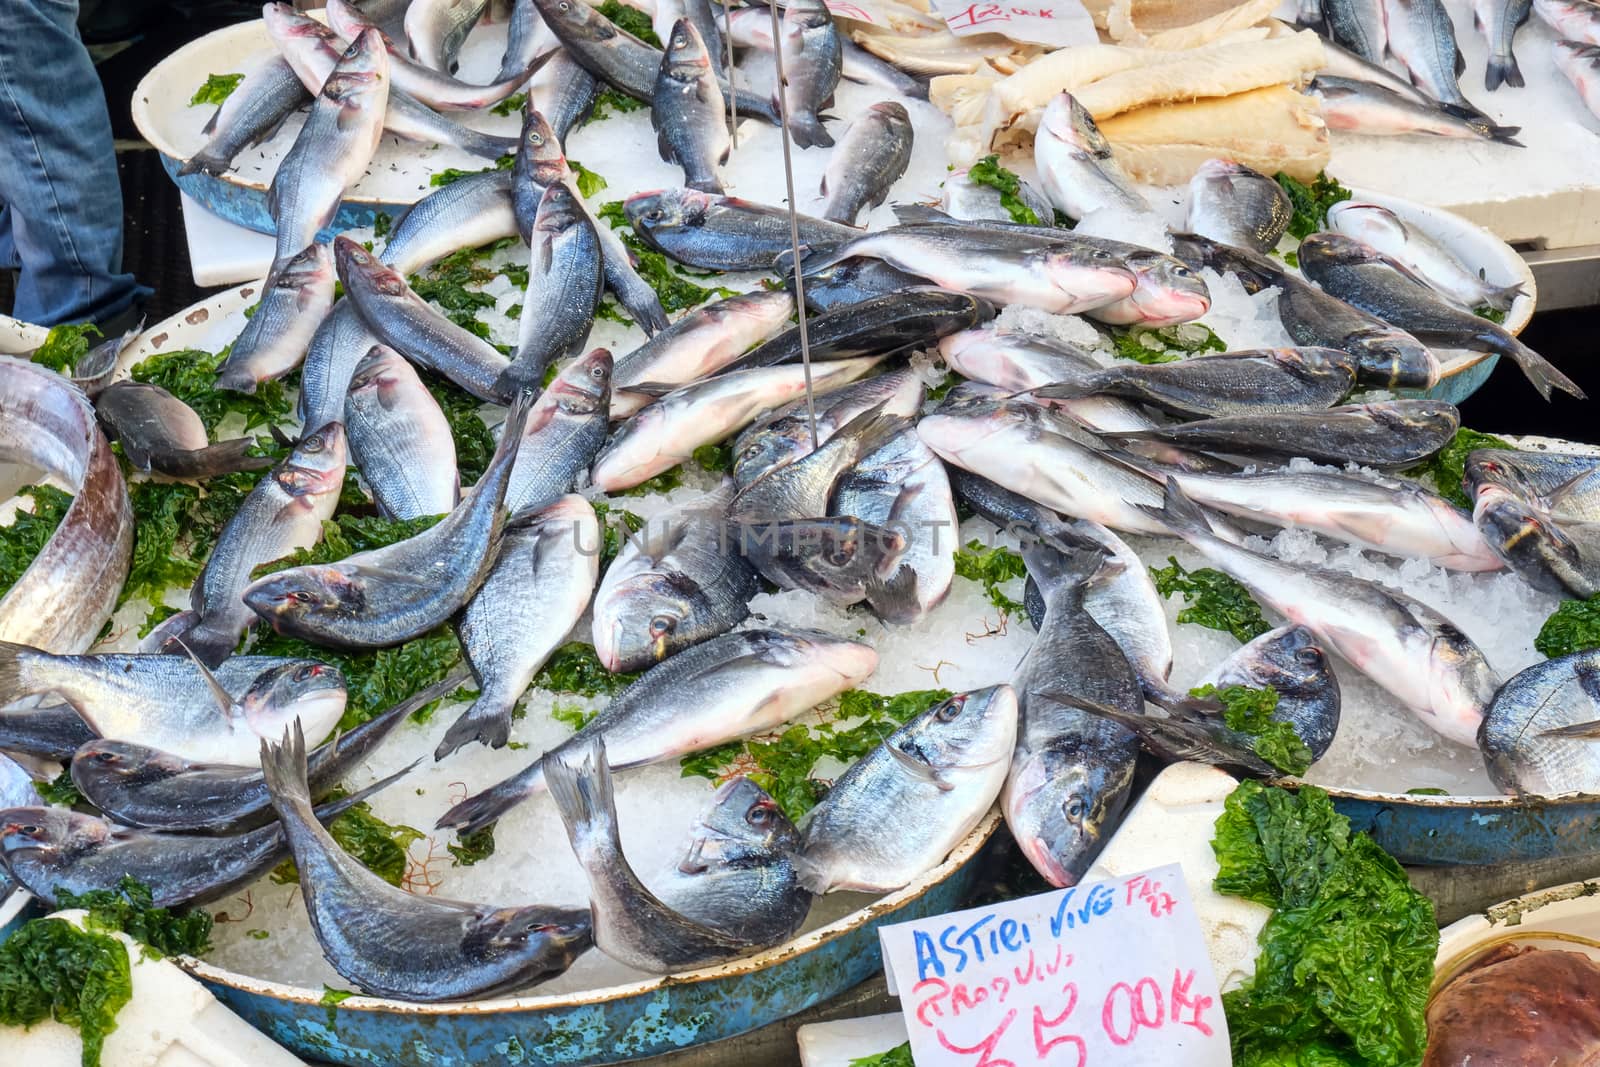 Small fish on ice for sale at a market